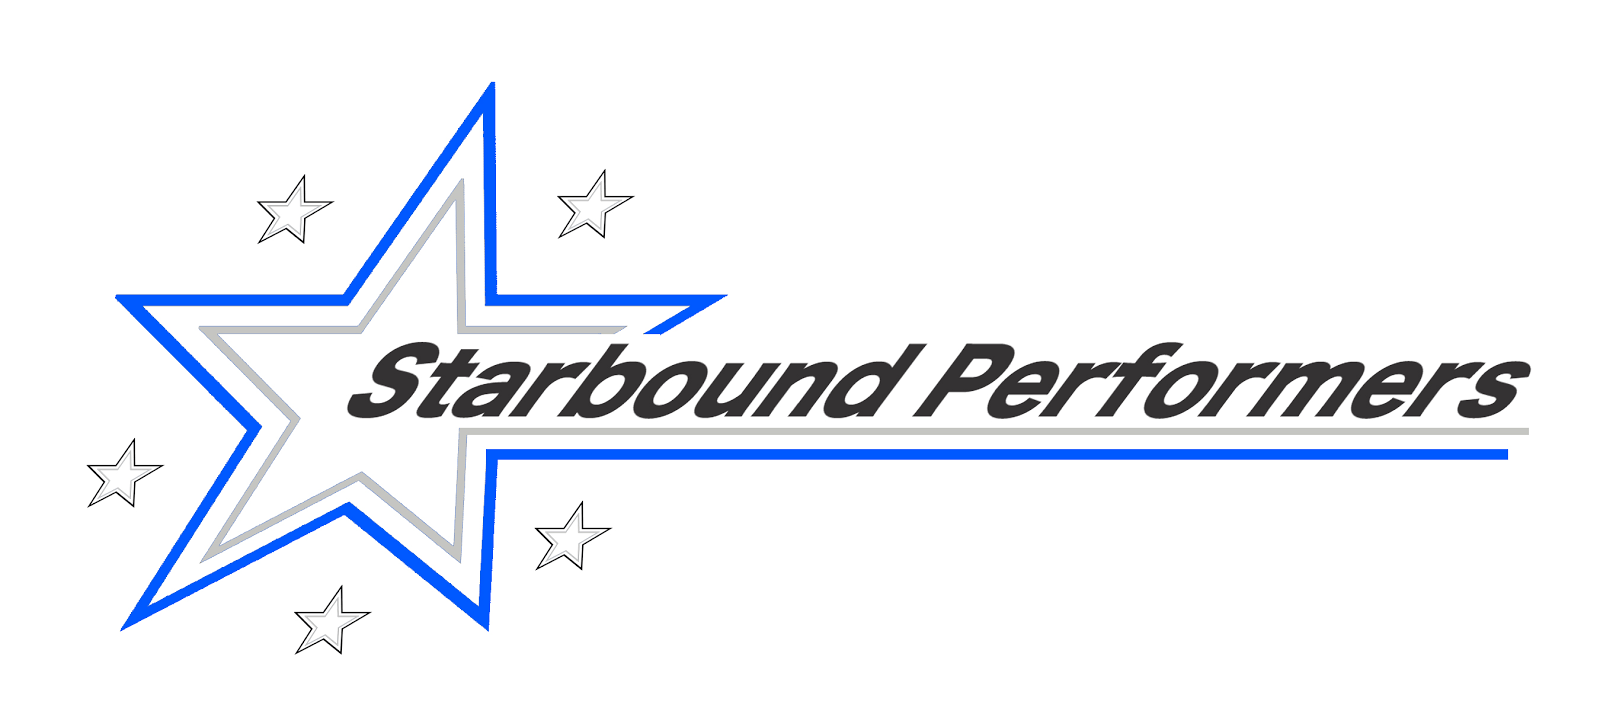 Starbound Performers - Where Every Performer is a Star!